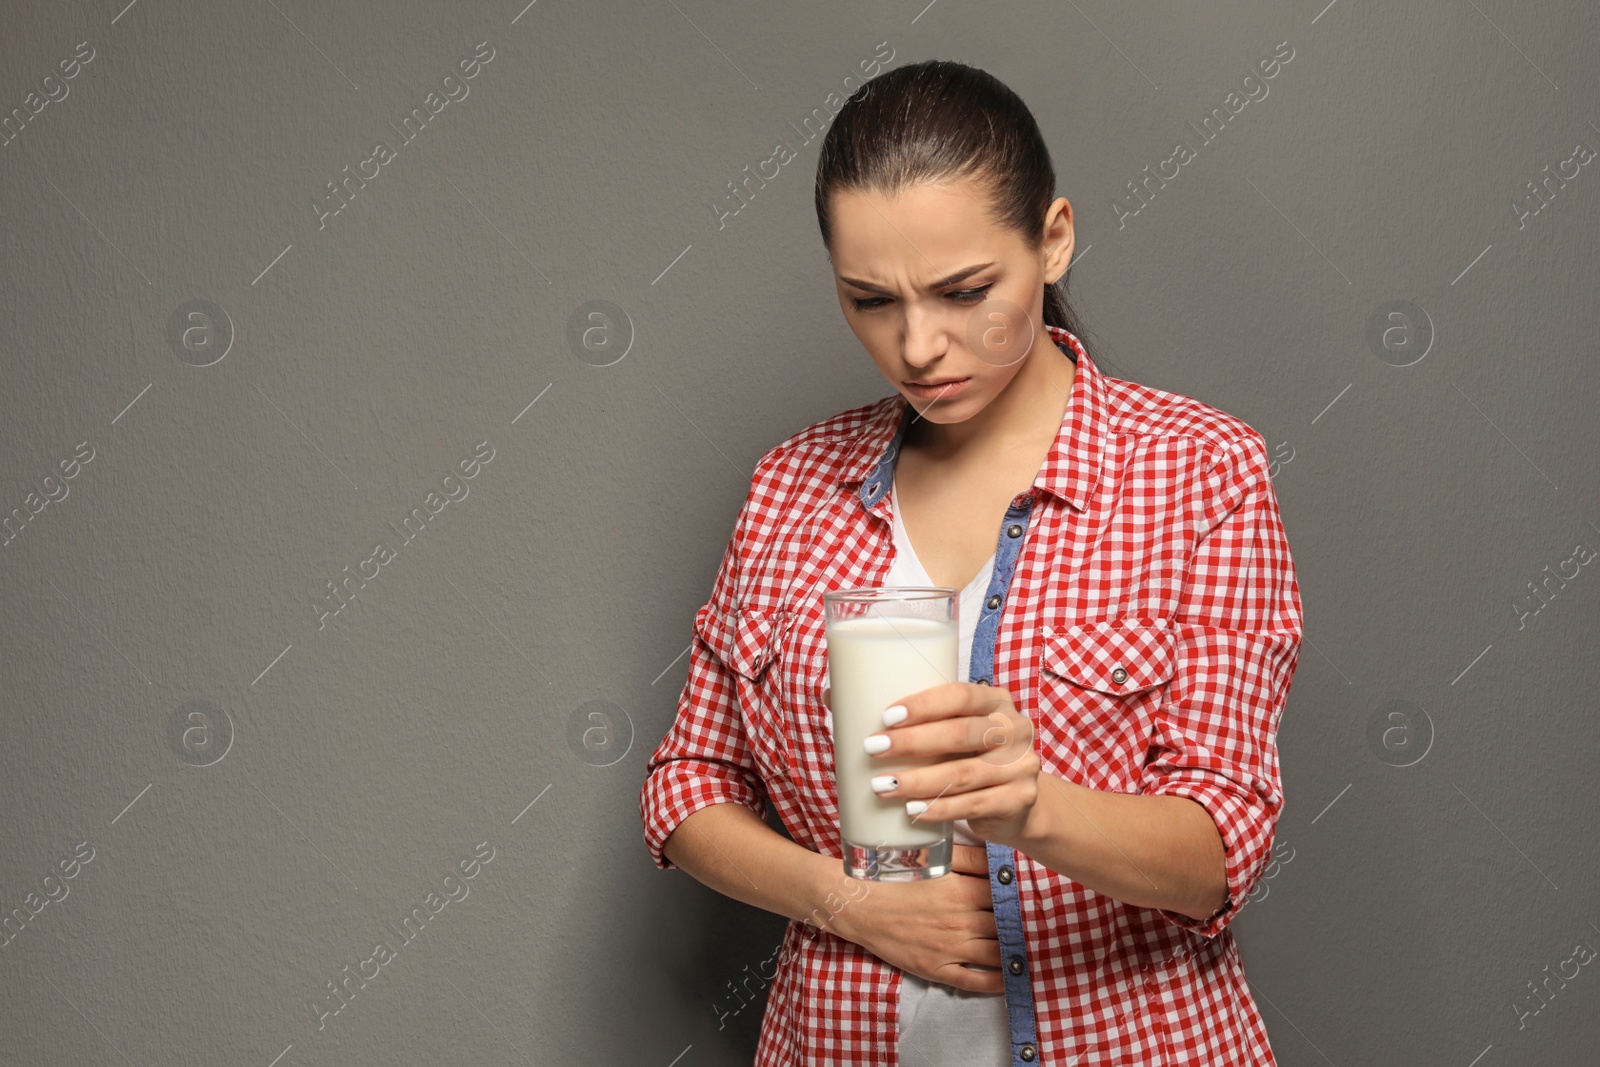 Photo of Young woman with dairy allergy holding glass of milk on grey background